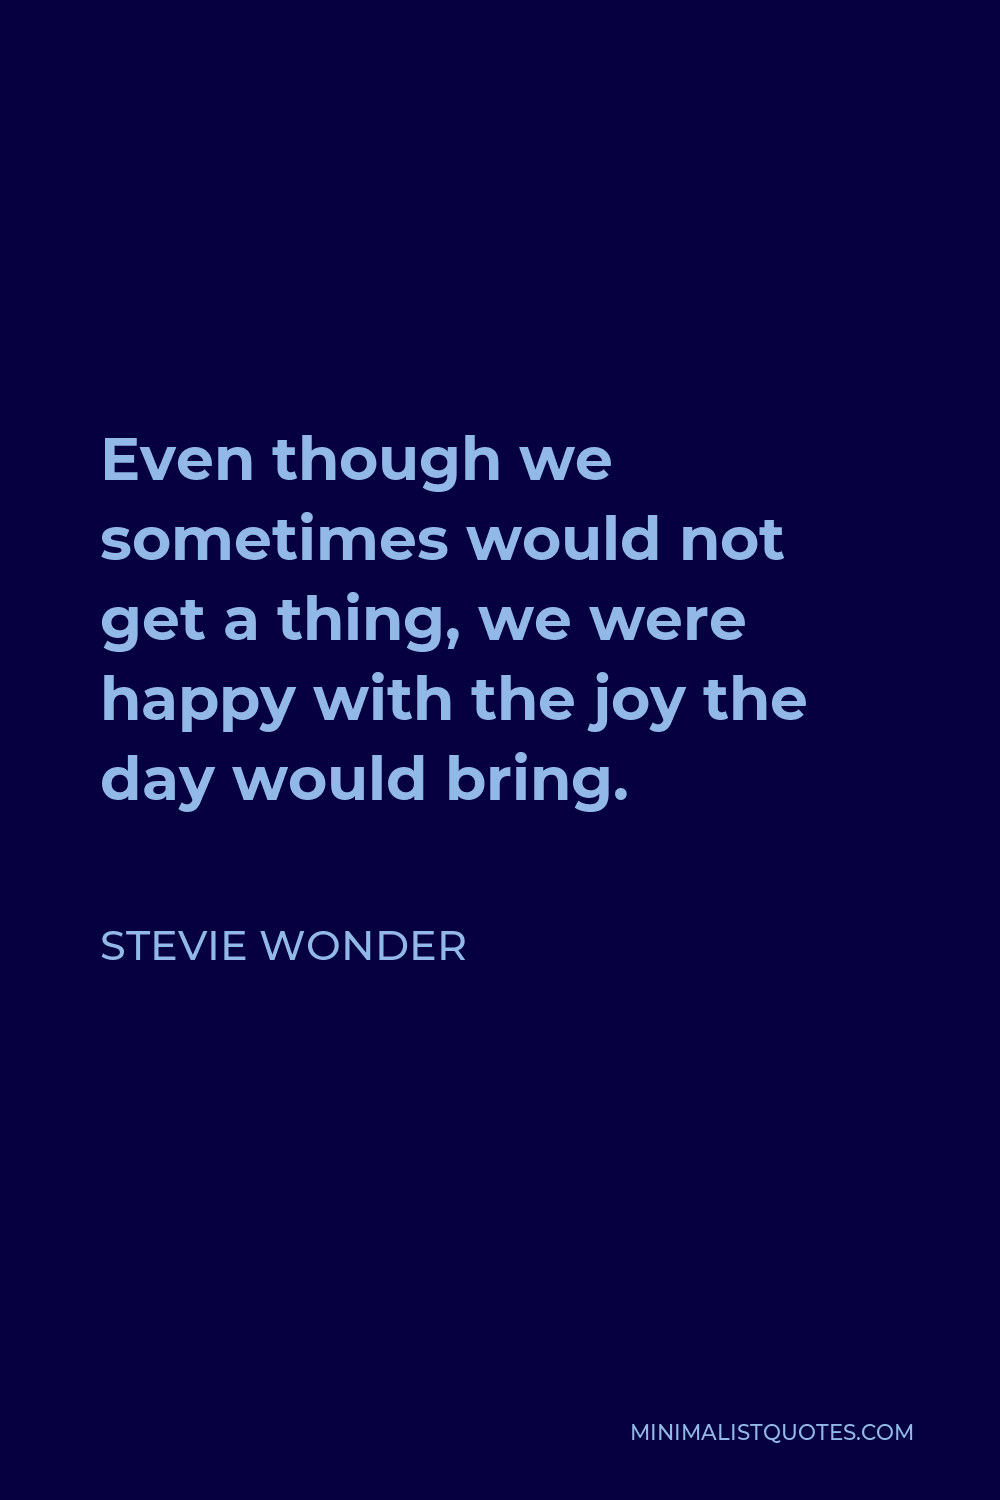 Stevie Wonder Quote - Even though we sometimes would not get a thing, we were happy with the joy the day would bring.